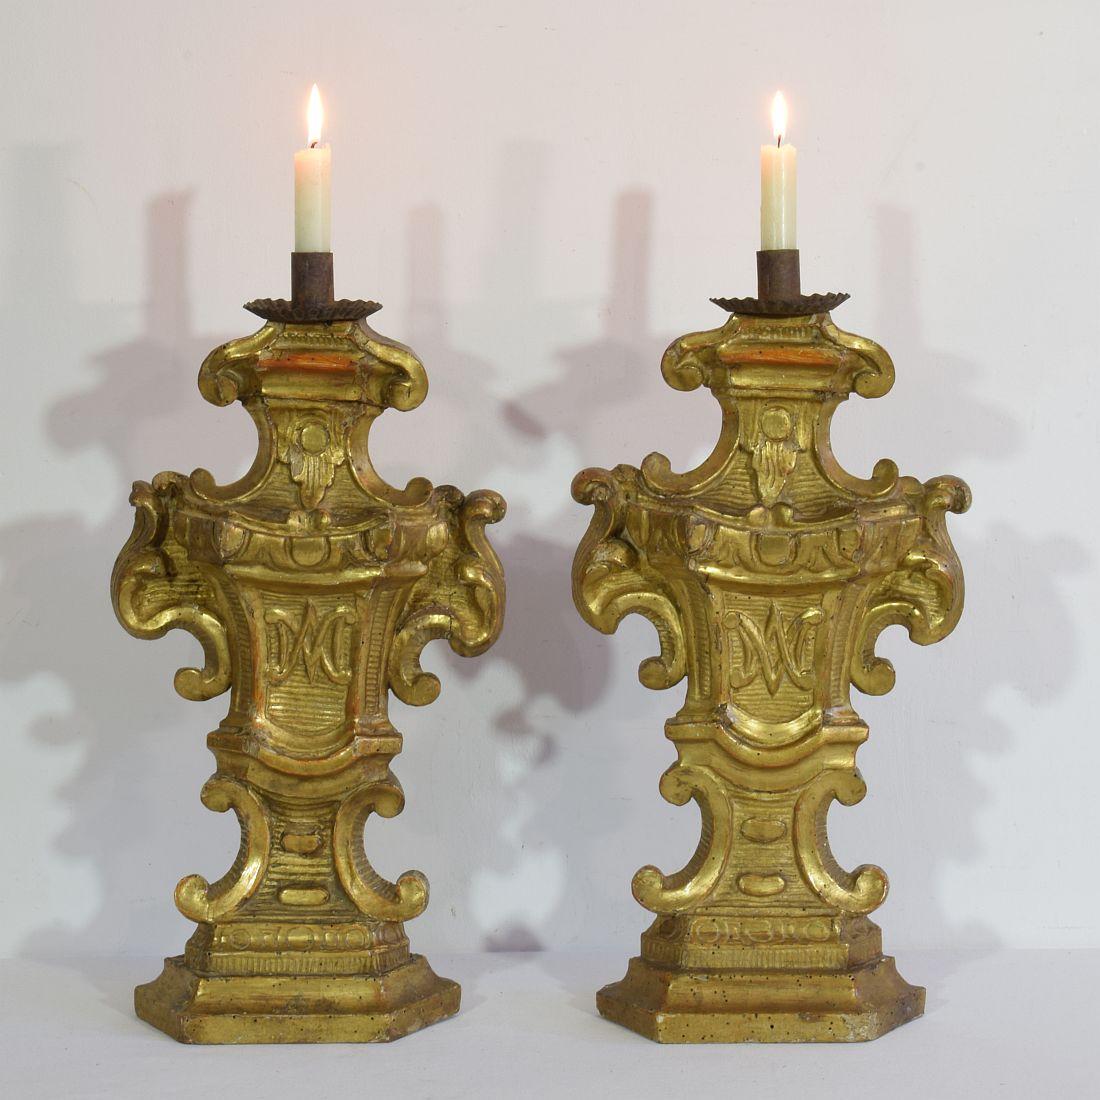 Wondeful Baroque giltwood candleholders , Italy, circa 1750-1780. Weathered, repairs and small losses.
Measurement individual.